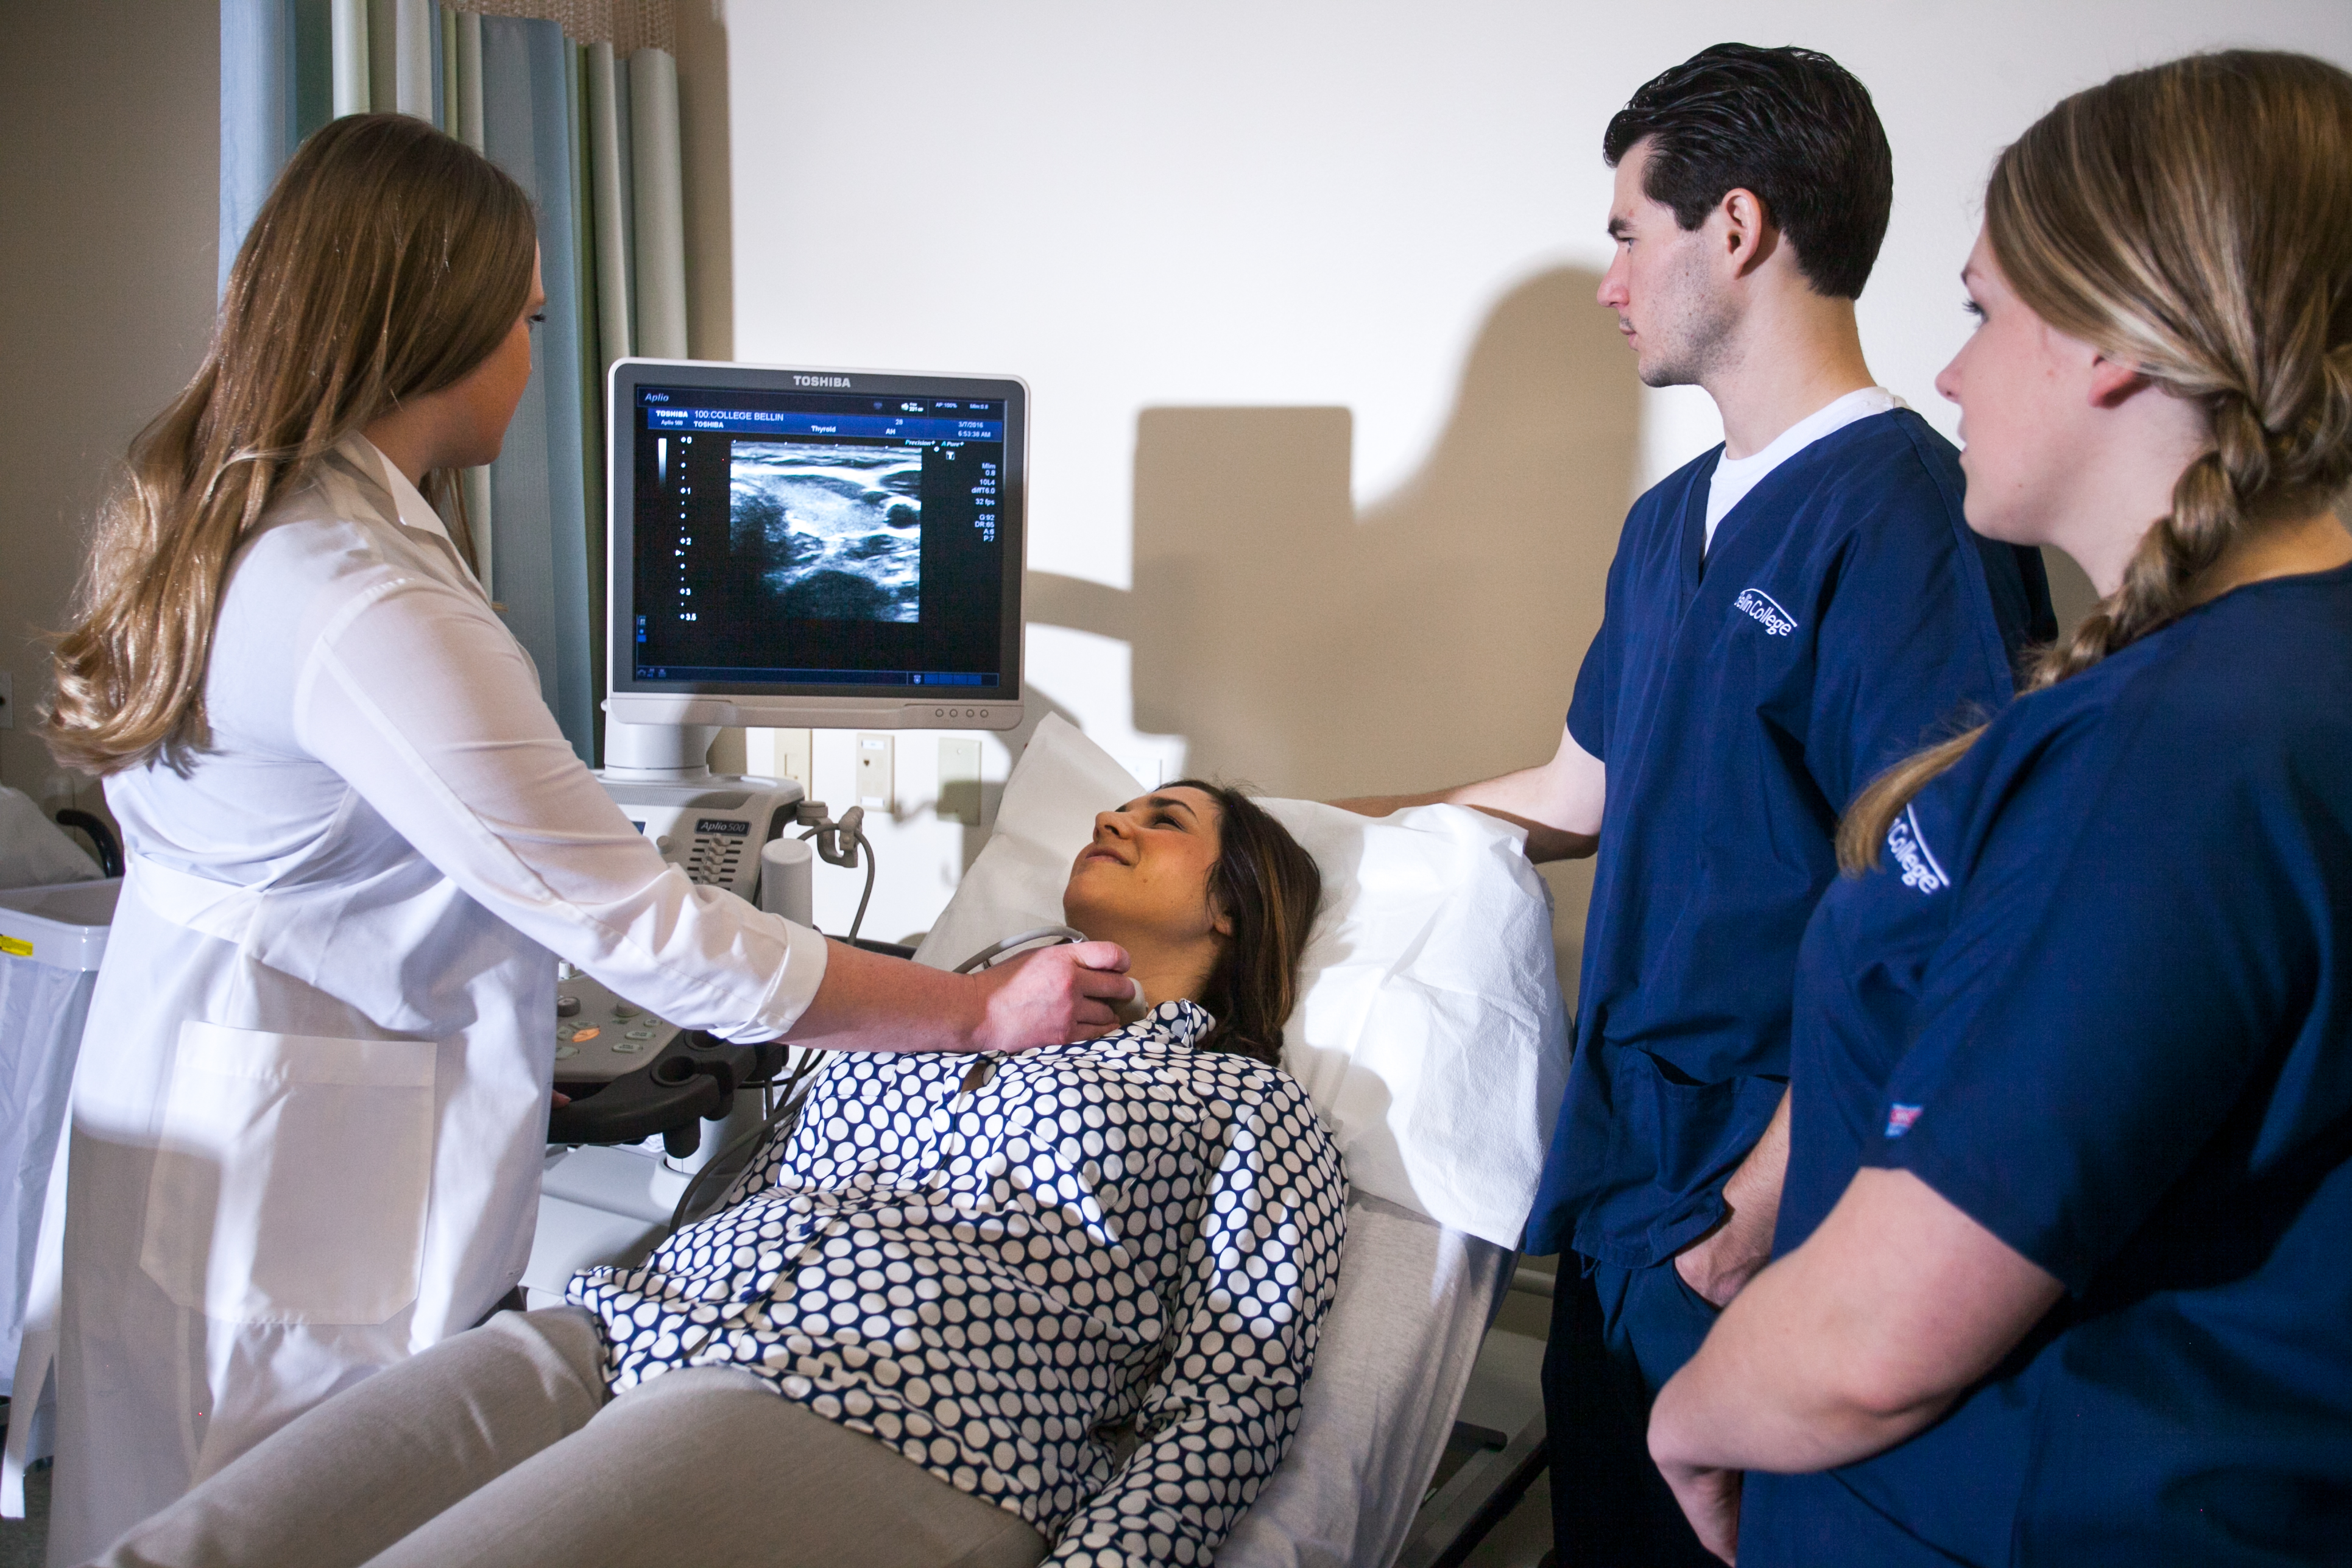 Neck scan using ultrasound machine as students look on